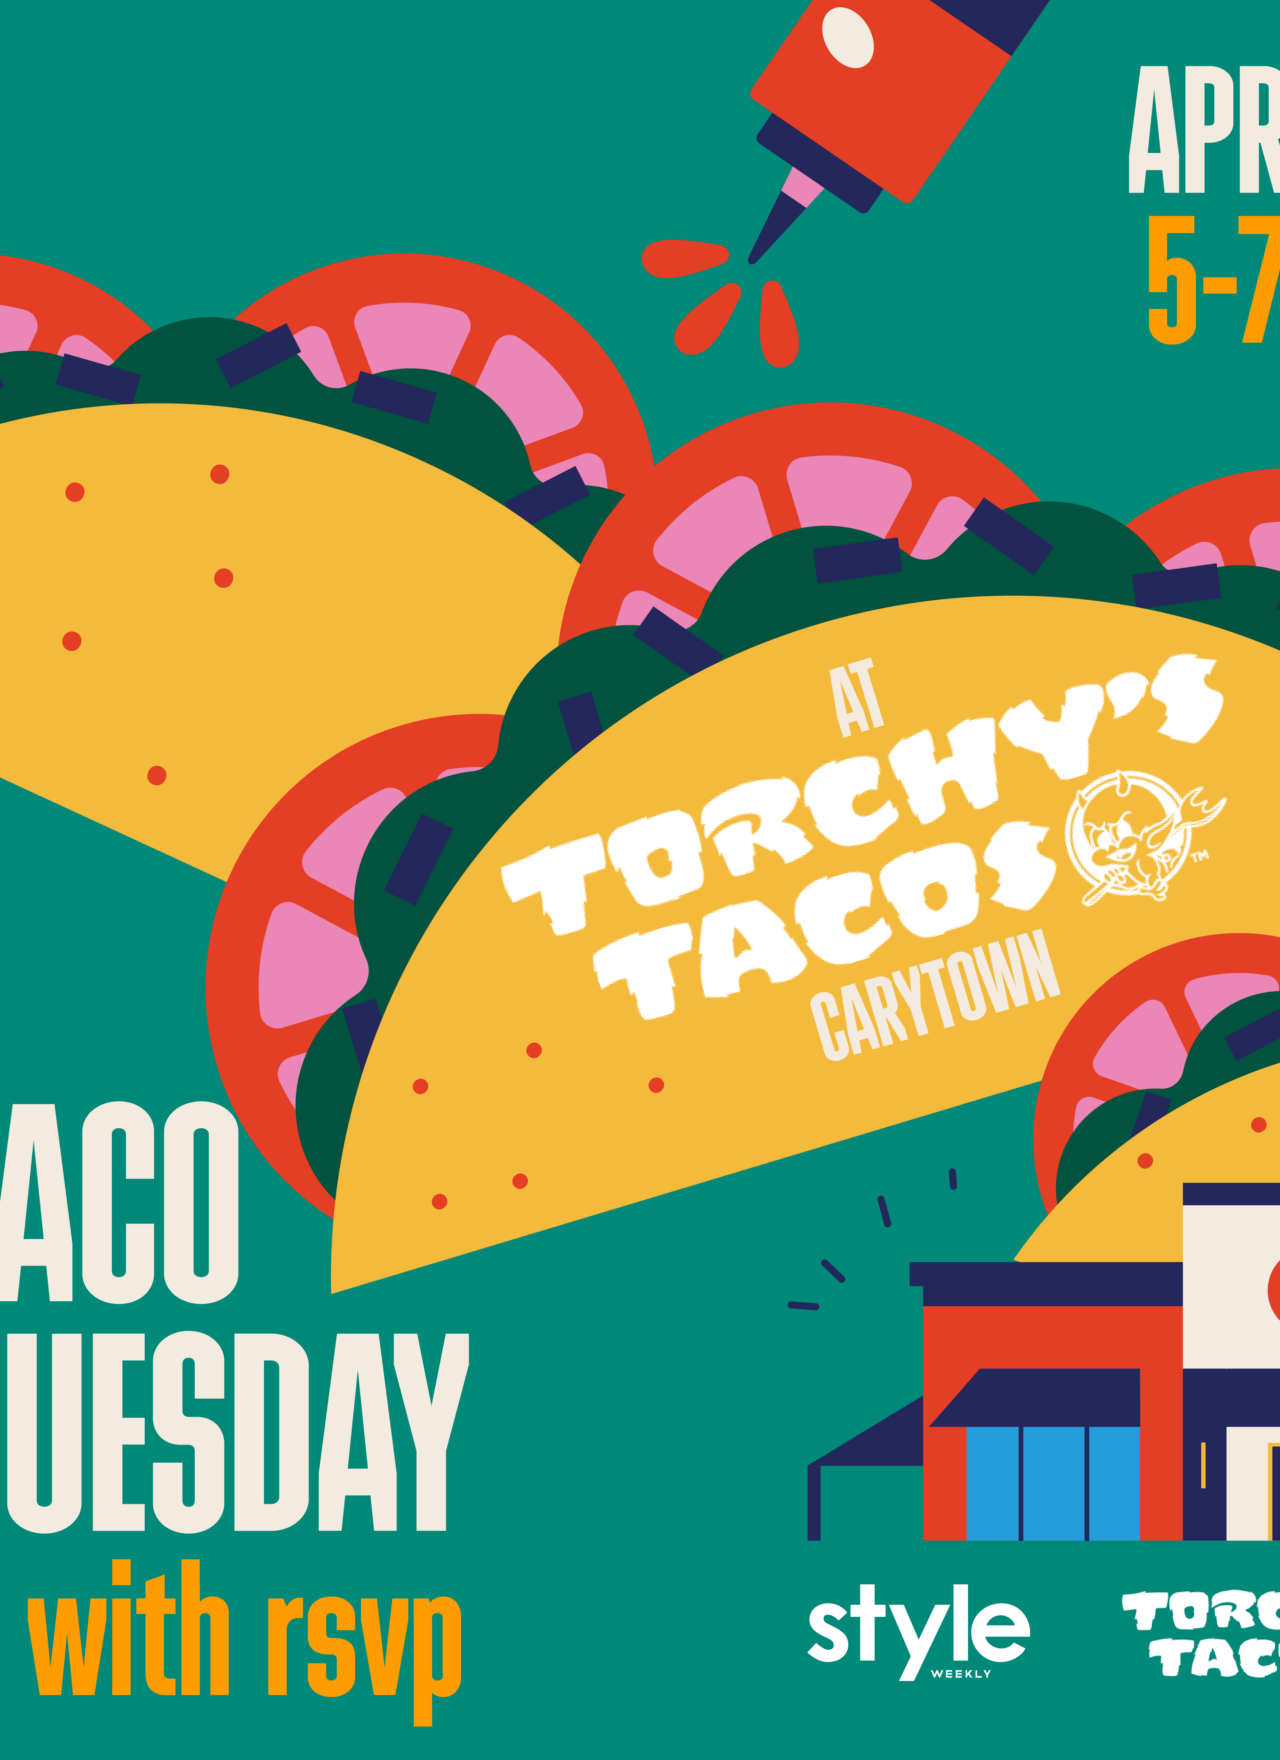 Taco Tuesday Popup with STYLE Weekly + Torchy’s Tacos of Carytown